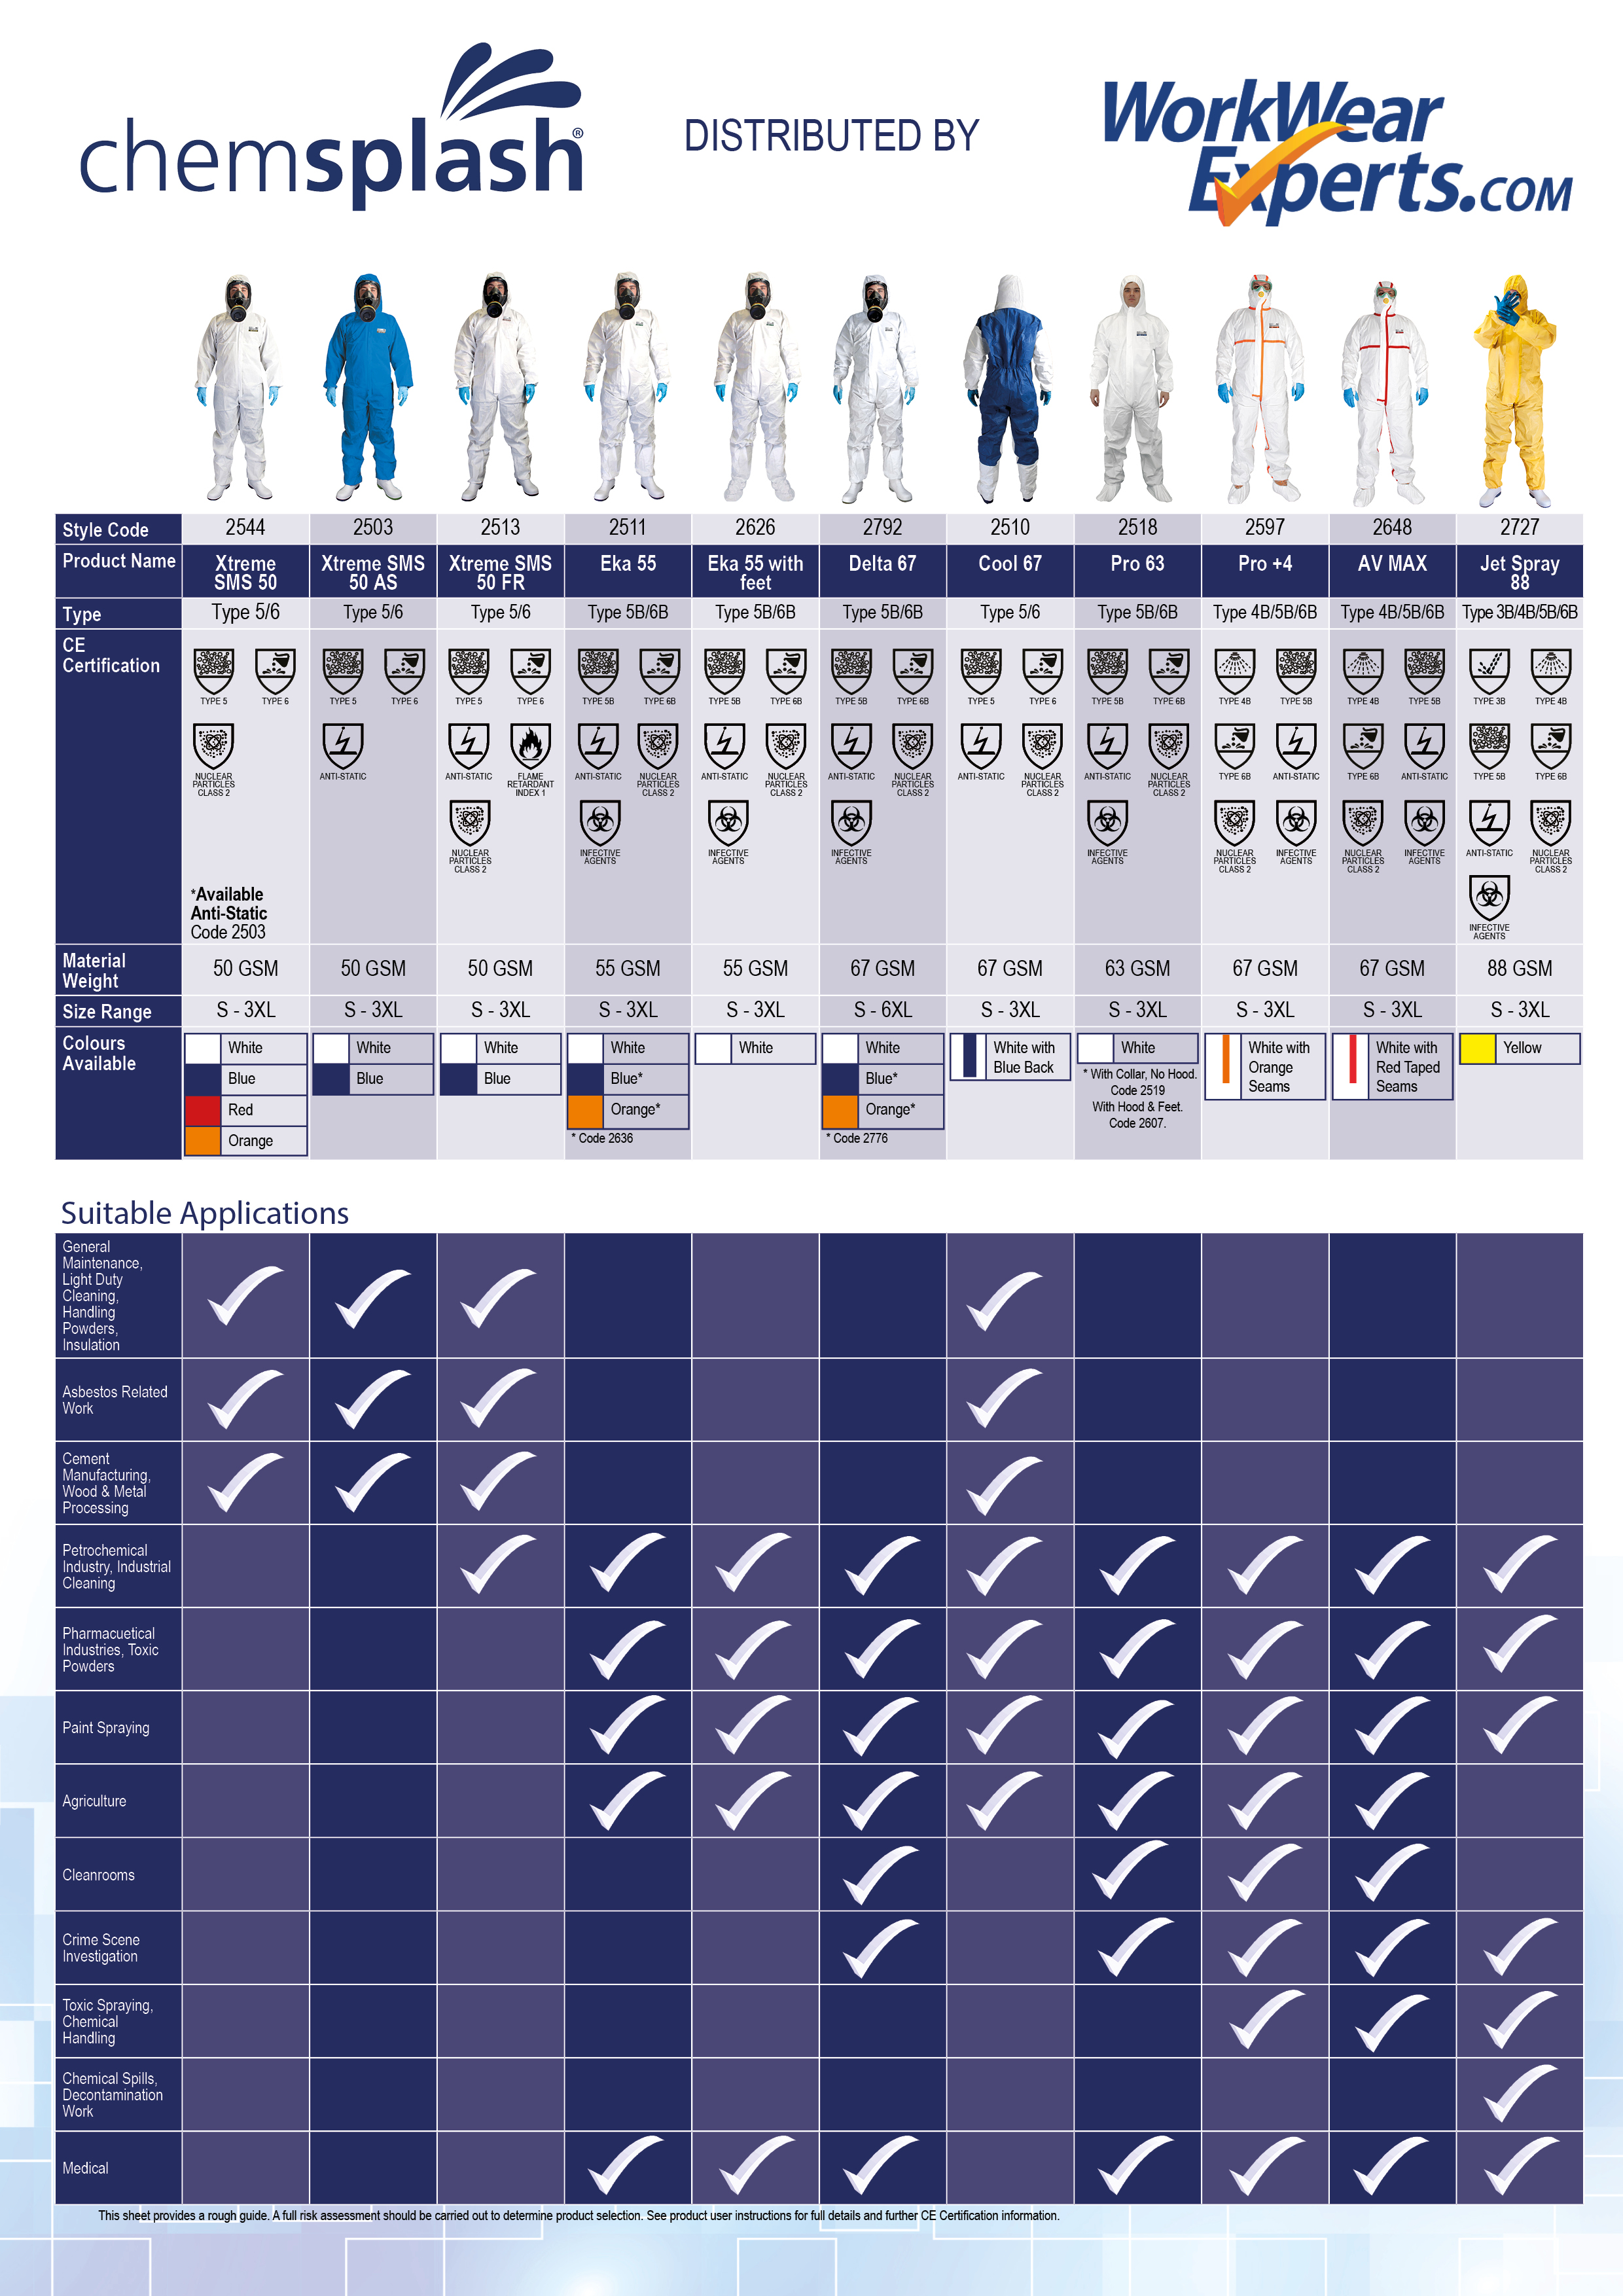 Chemsplash Disposable Coveralls Guide Infographic